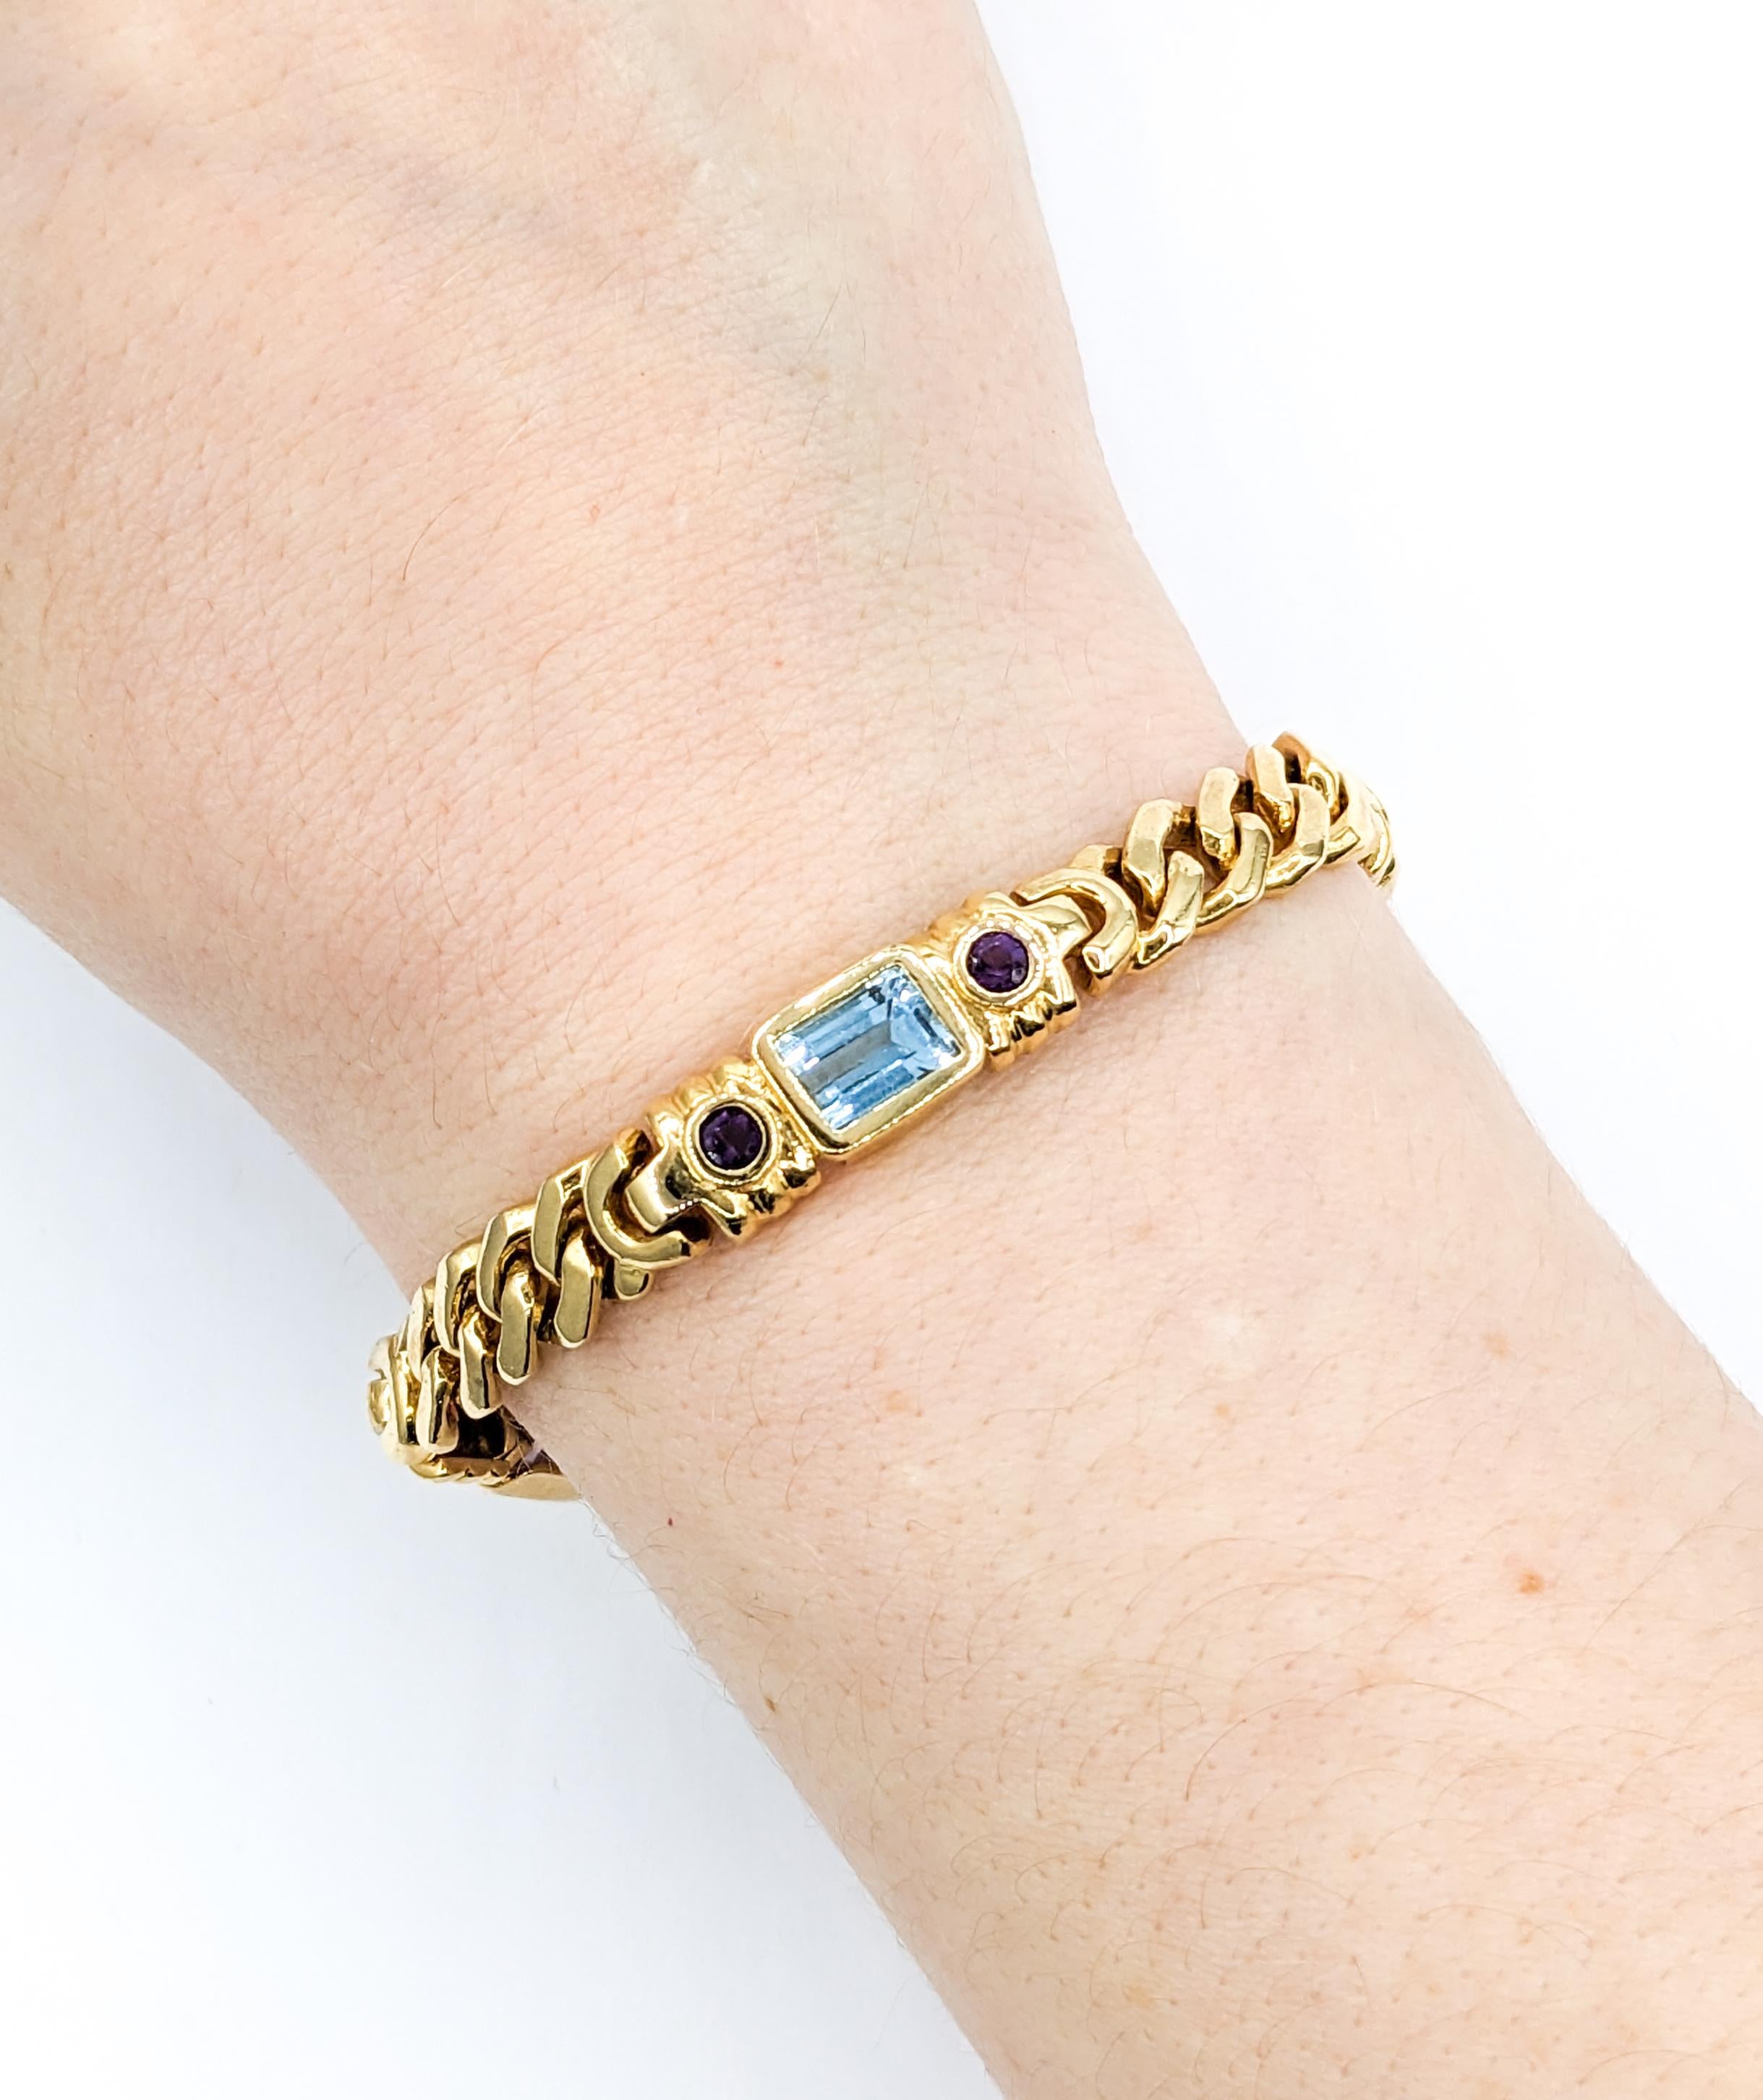 Multicolored Gemstone & 14K Gold Link Bracelet

This stylish bracelet is crafted in 14kt yellow gold and features garnet, blue topaz, amethyst and citrine gemstones. This bracelet measures 7 1/2 inches in length; total weight is 23.32g.

14kt Yellow